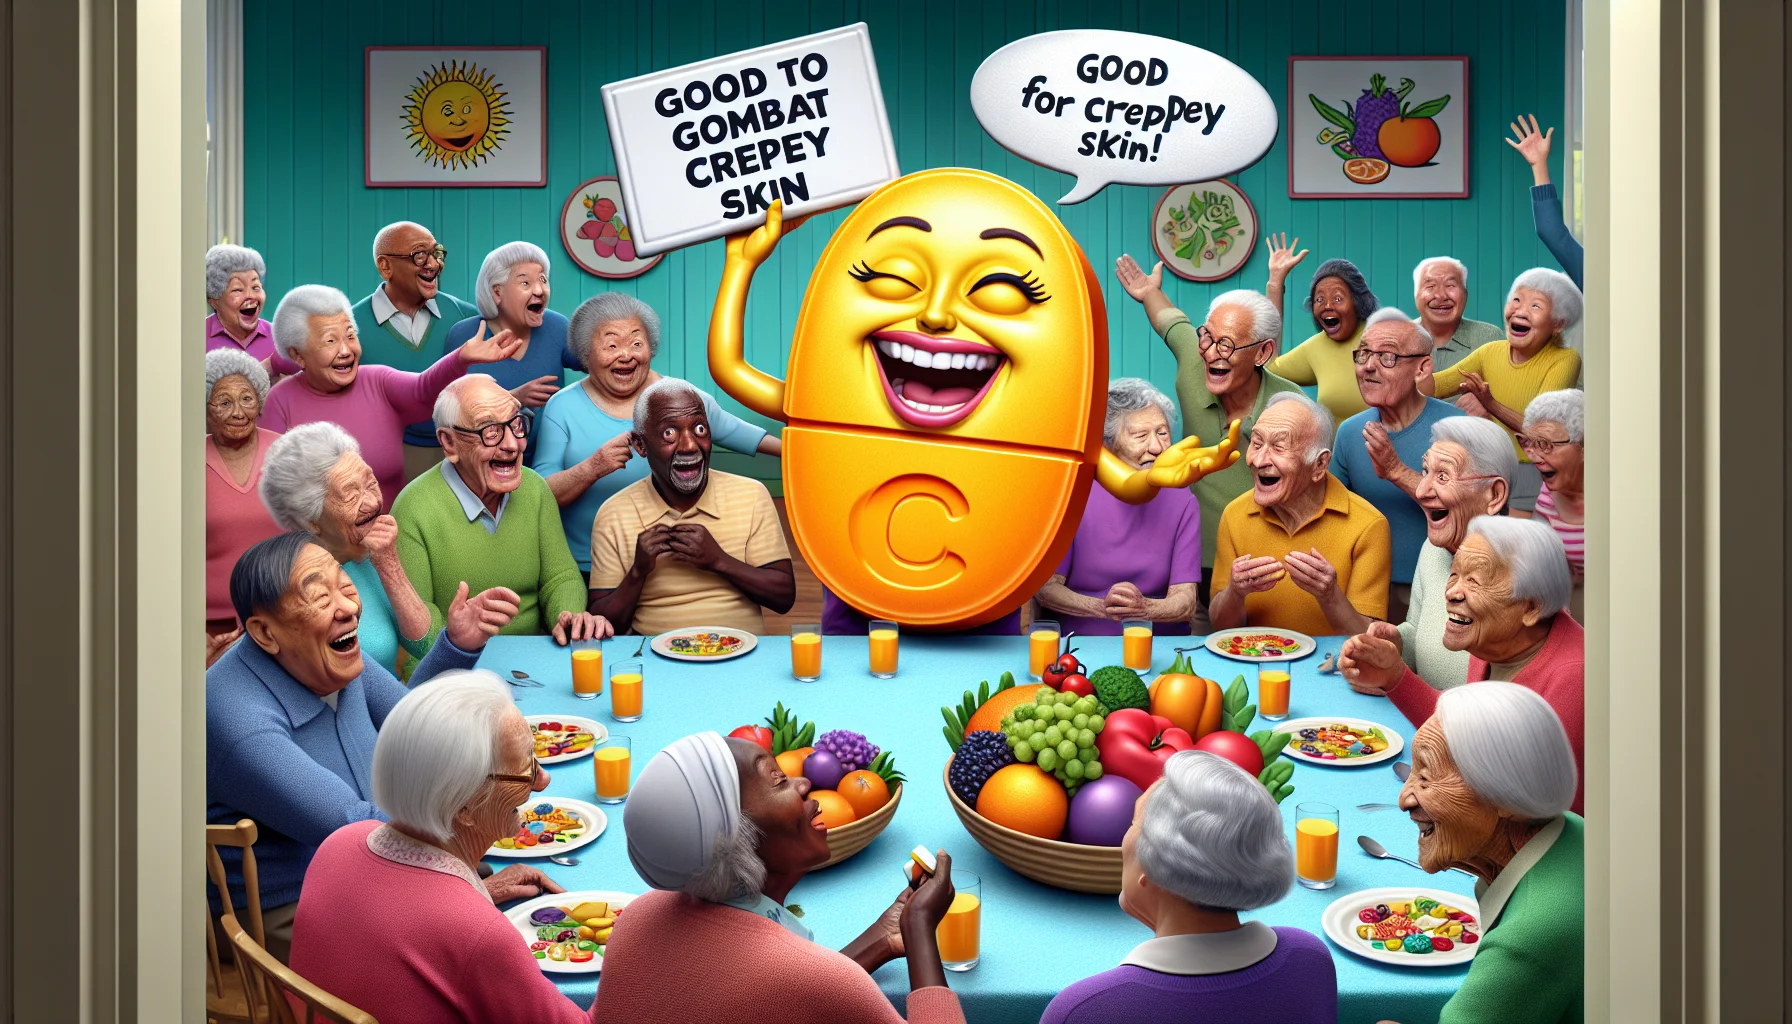 An amusing image depicting a humorous scenario featuring elderly individuals, diets, and healthy eating. The scene takes place in a vibrant communal dining space filled with gregarious senior citizens from diverse backgrounds - African, Asian, Caucasian, Middle-Eastern, and Hispanic. A joyful elderly South Asian woman announces to her friends that she's found the secret to combat crepey skin, unveiling a large, luminary caricature of a Vitamin C tablet in her hand. The caricature, with a big, cartoonish smile, holds a sign that reads 'Good for Crepey Skin'. The residents laugh heartily, some showing surprise, and others depicting interest. They're surrounded by plates filled with colorful fruits and vegetables, indicative of a healthy diet.